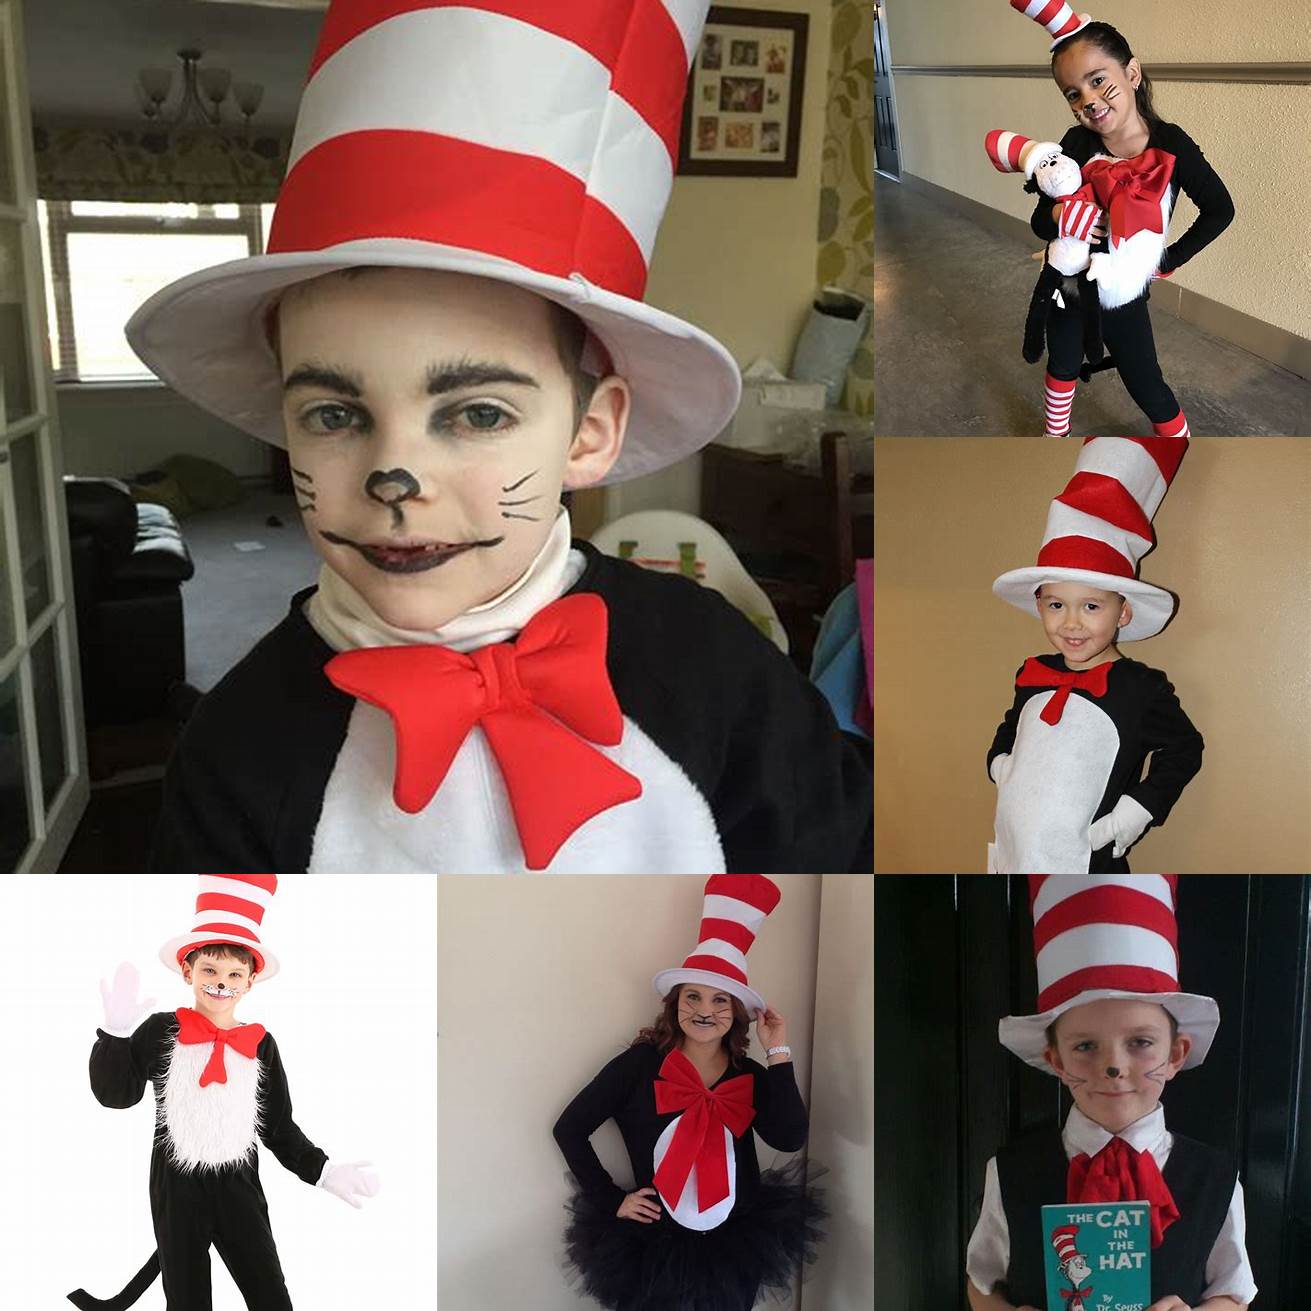 Dress Up as the Cat in the Hat